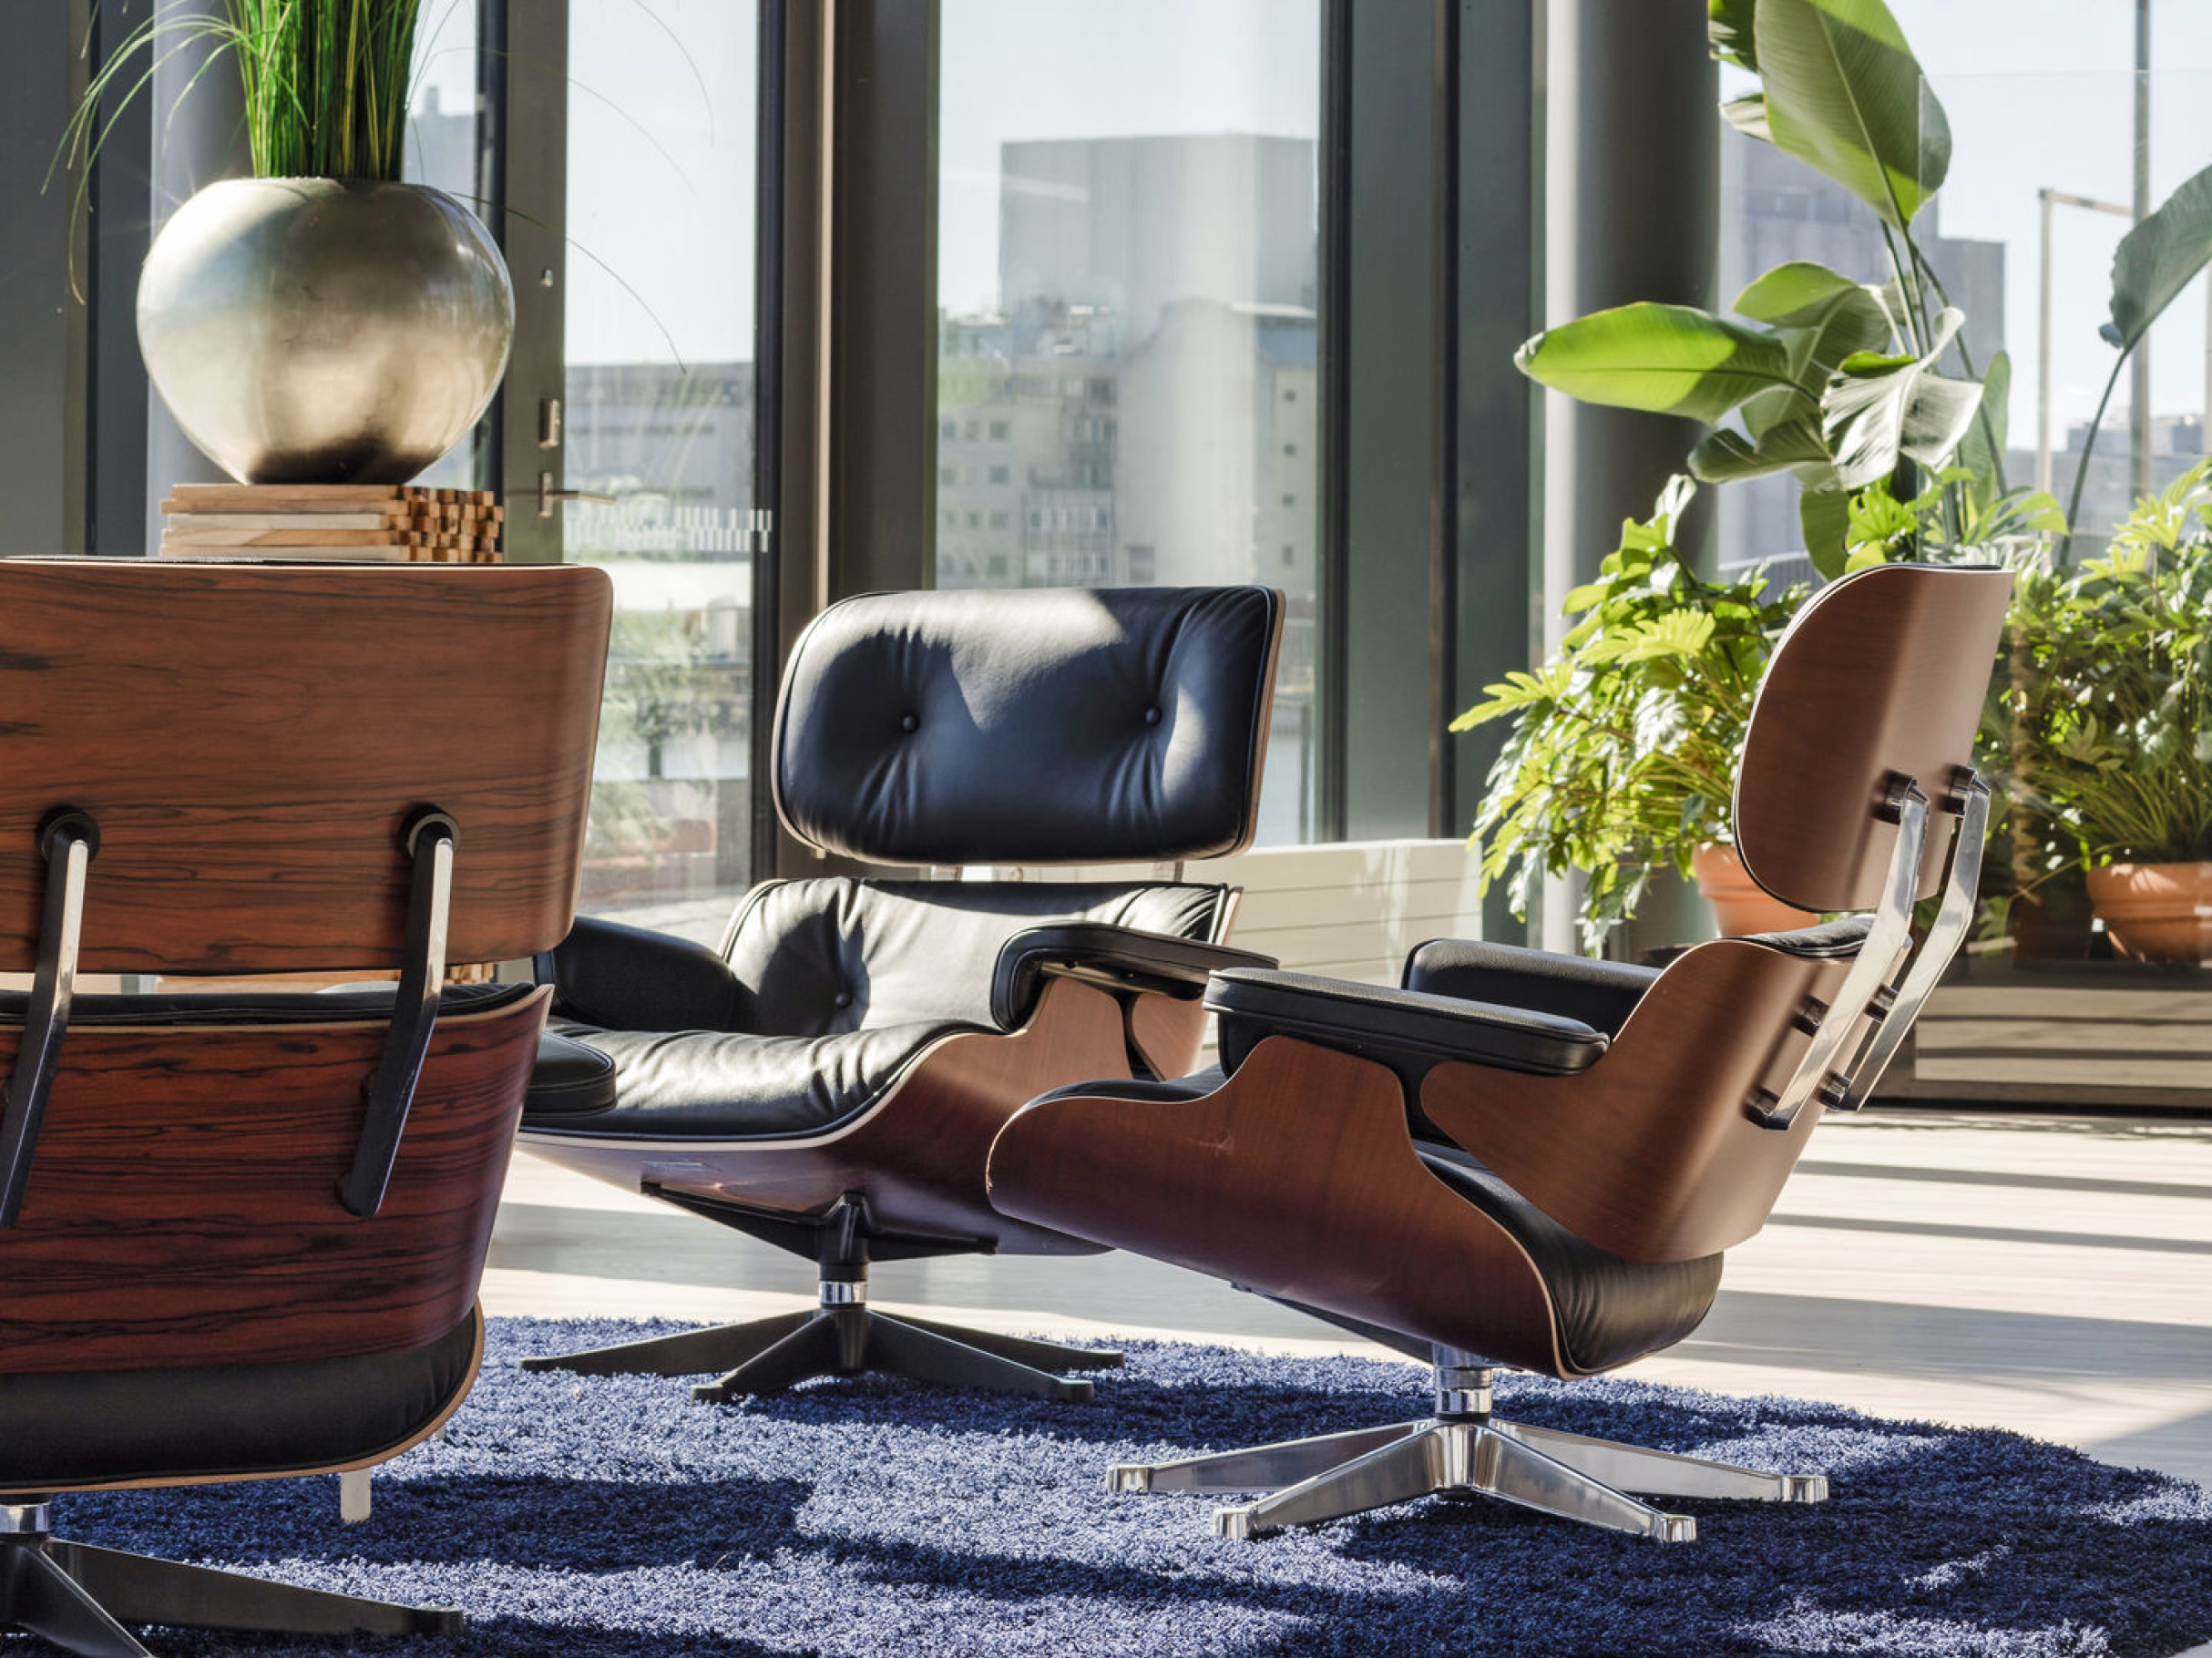 Eames Chair is ontworpen door Charles & Ray Eames